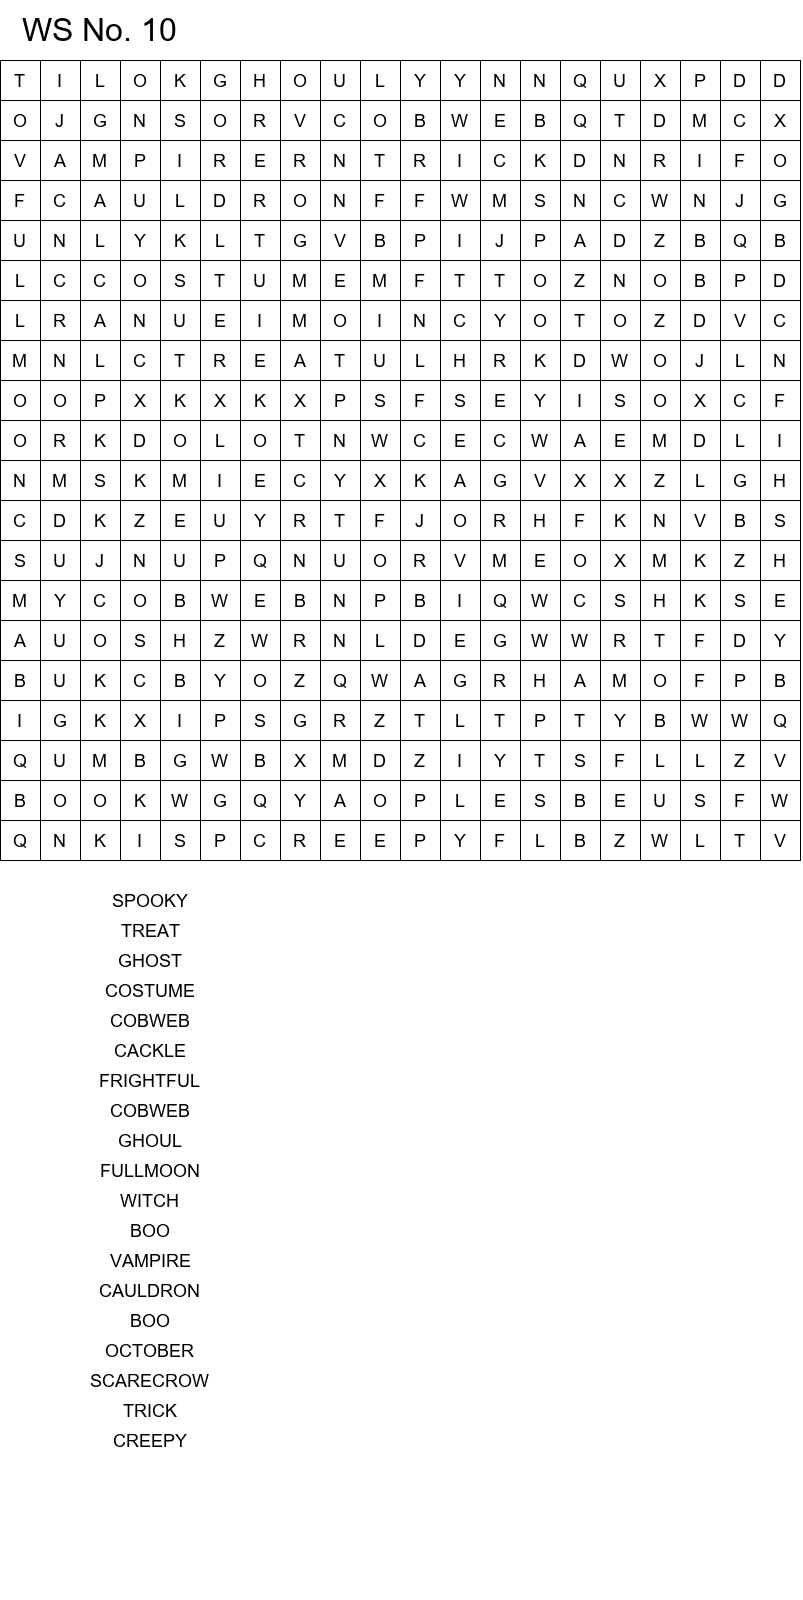 Free online Halloween word search puzzles size 20x20 No 10